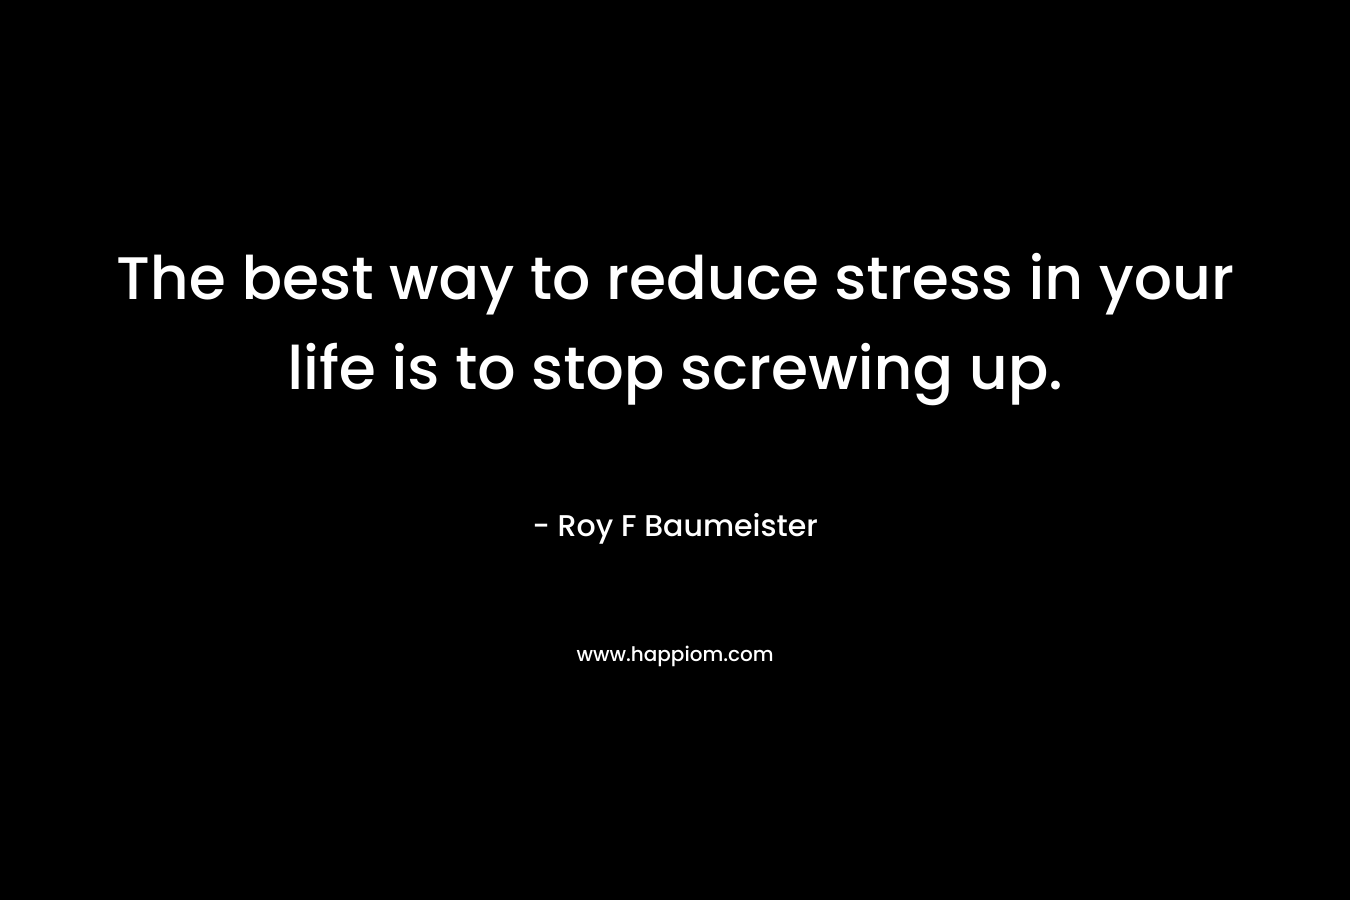 The best way to reduce stress in your life is to stop screwing up. – Roy F Baumeister